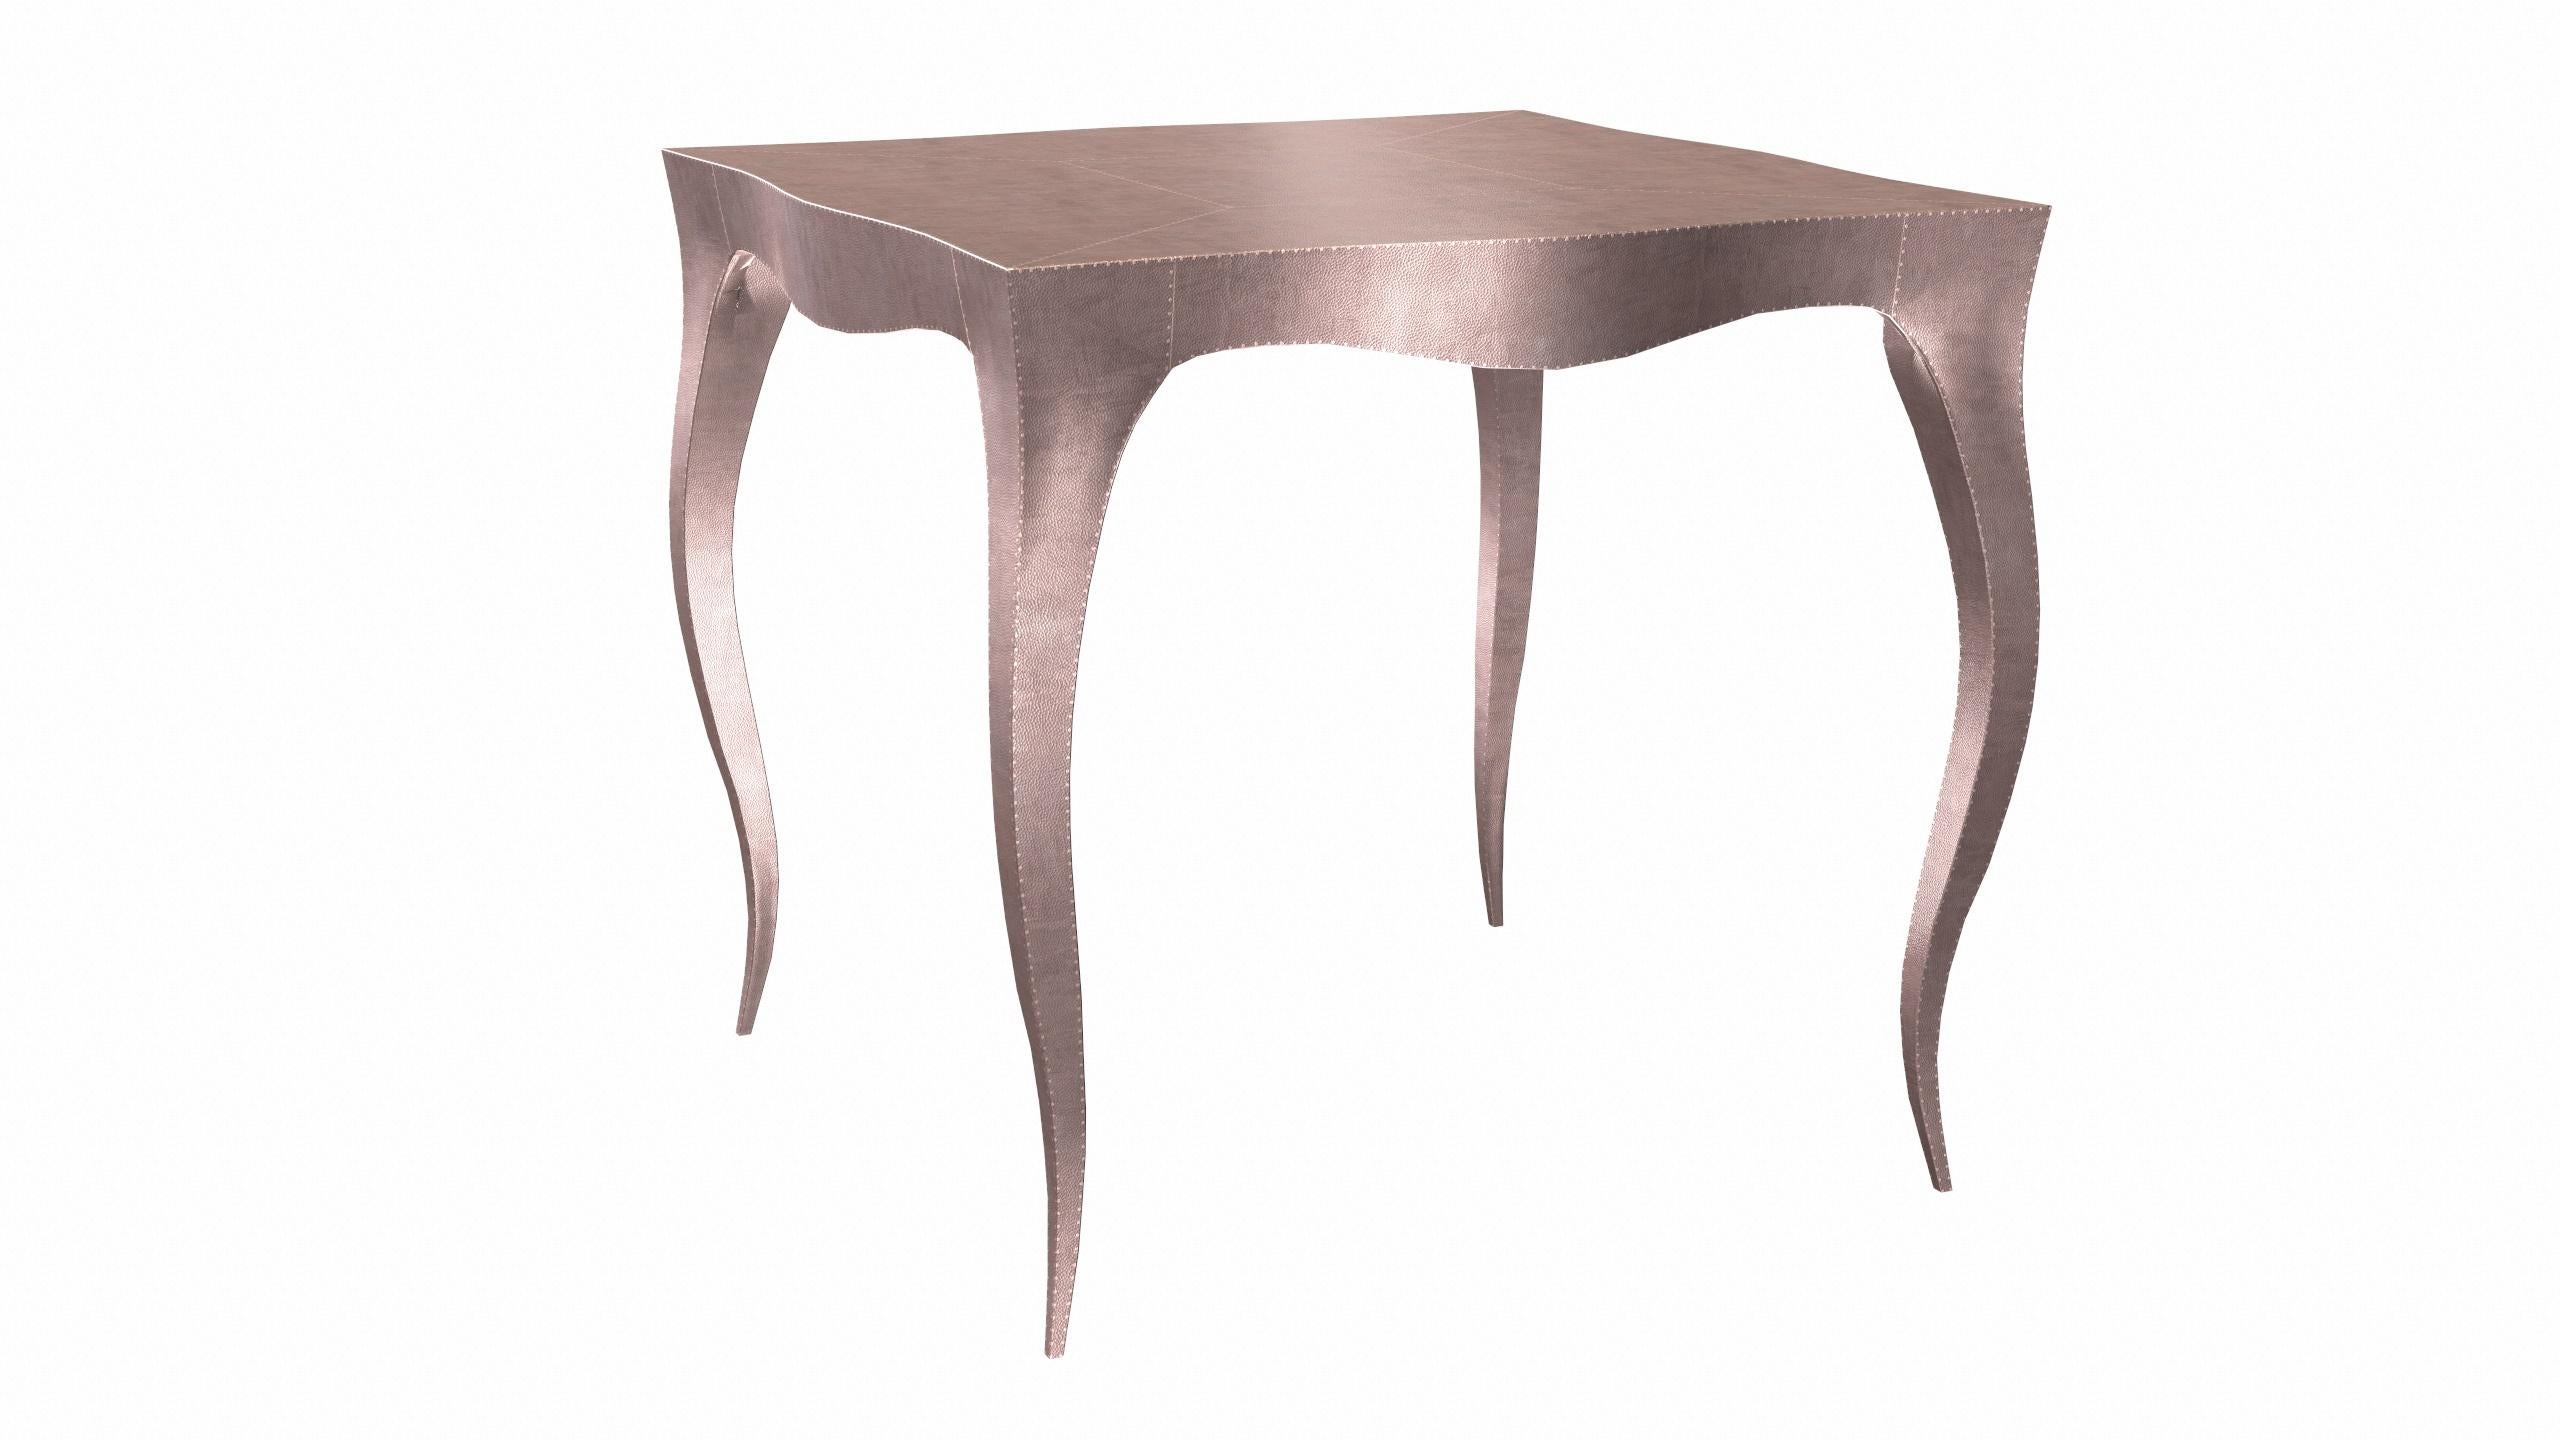 Hand-Carved Louise Art Deco Center Tables Mid. Hammered Copper by Paul Mathieu  For Sale